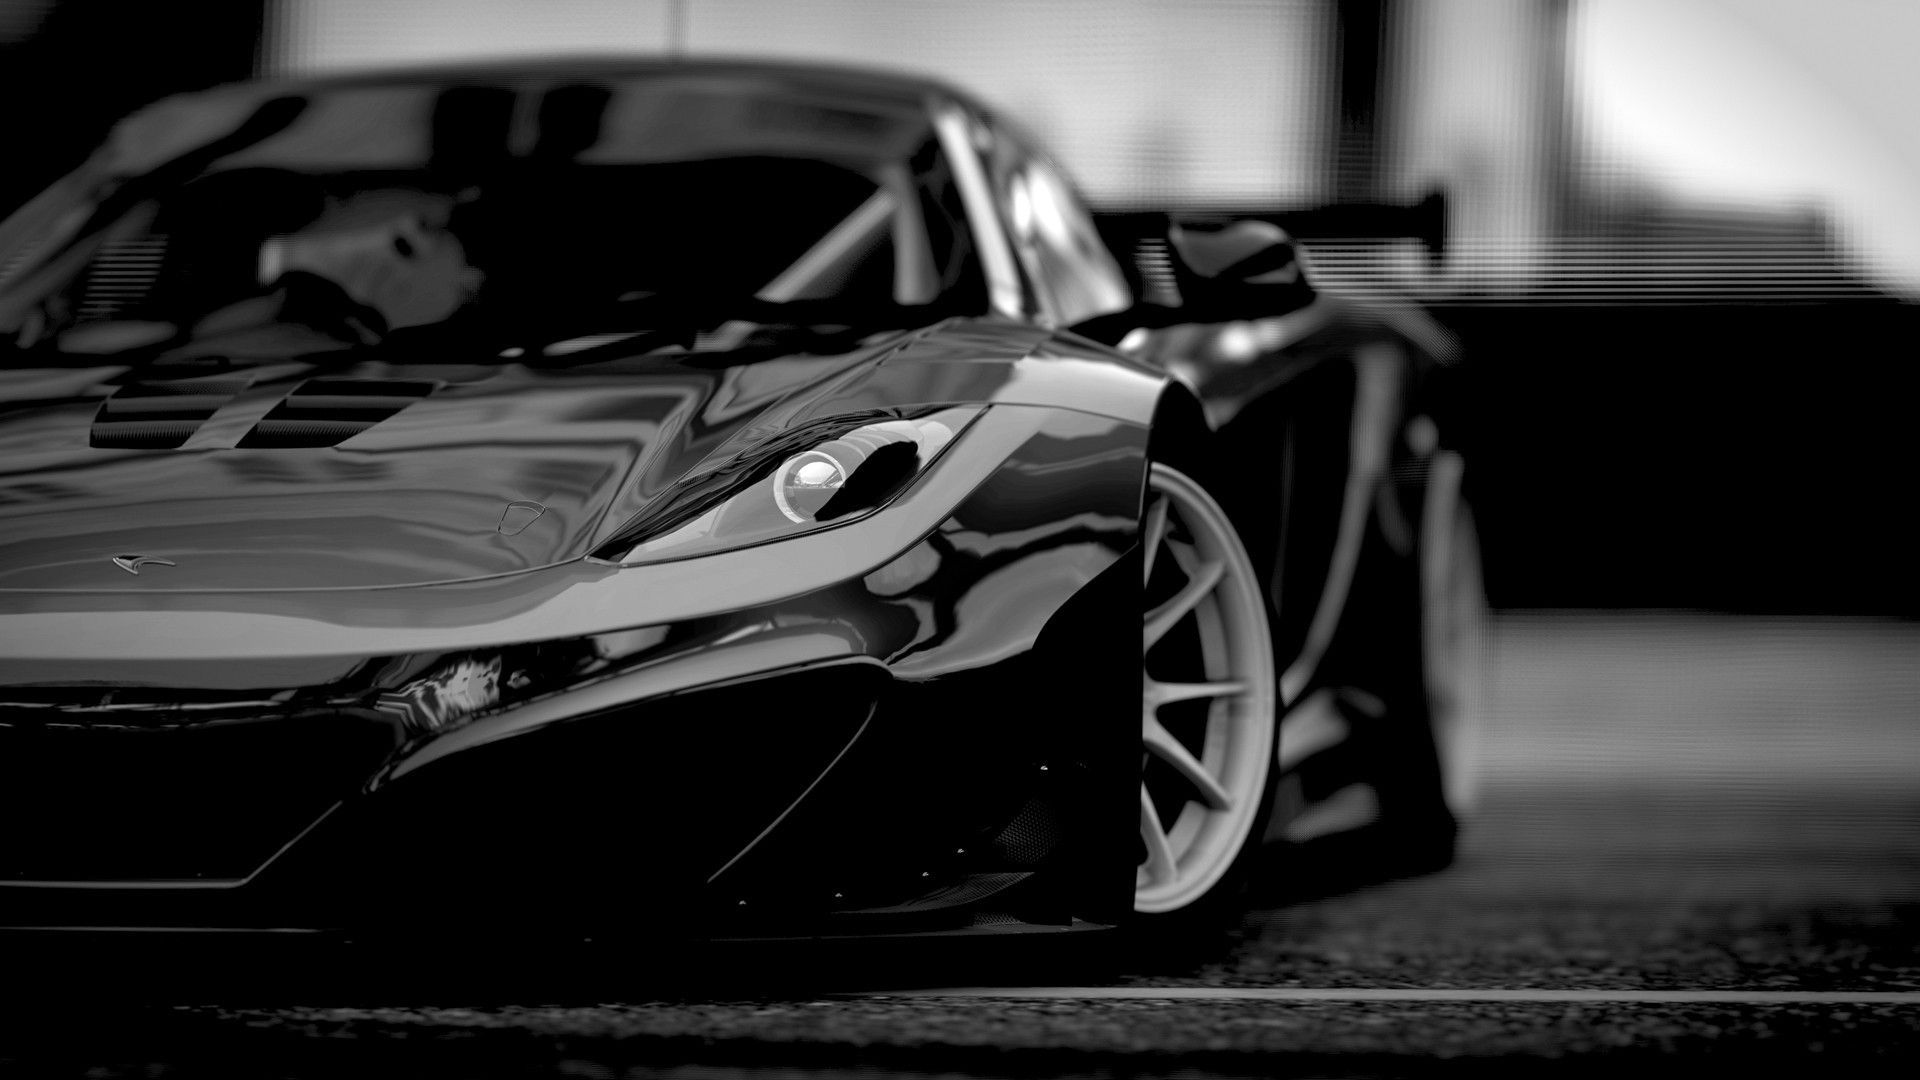 Black and White Car Wallpaper Free Black and White Car